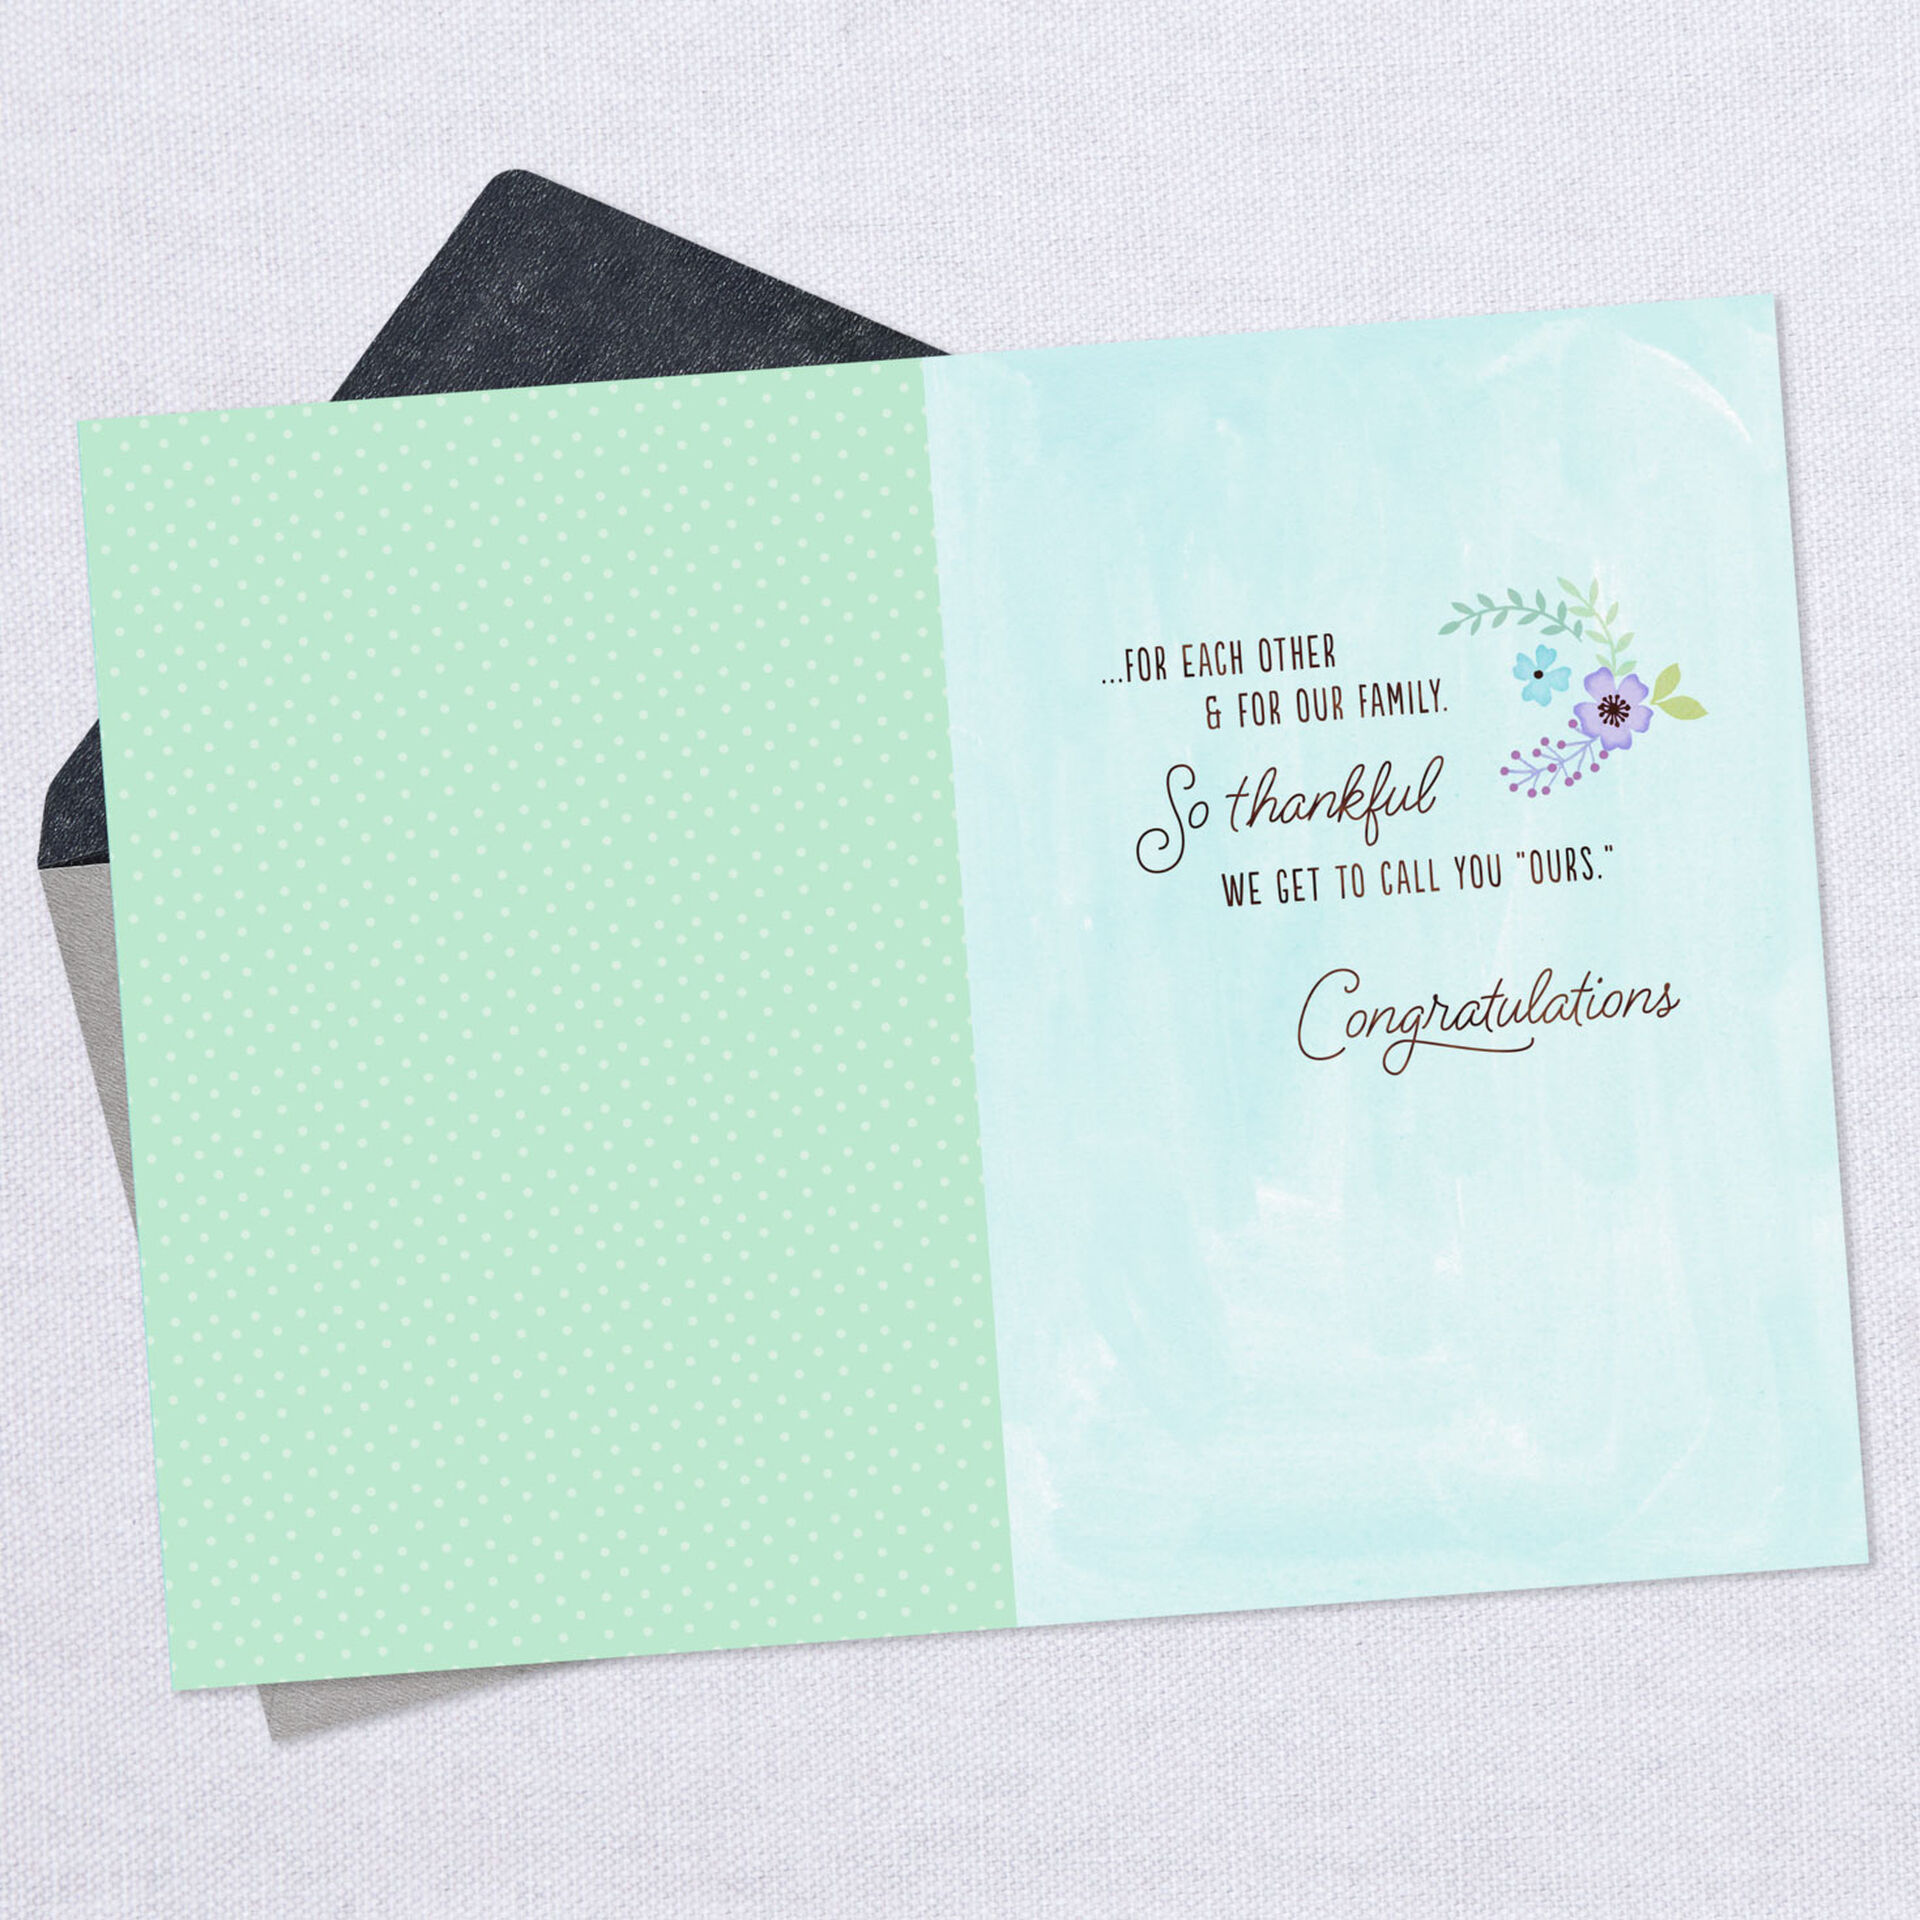 Wedding-Day-Shoes-Wedding-Card-for-Nephew-and-Wife_299W3817_03